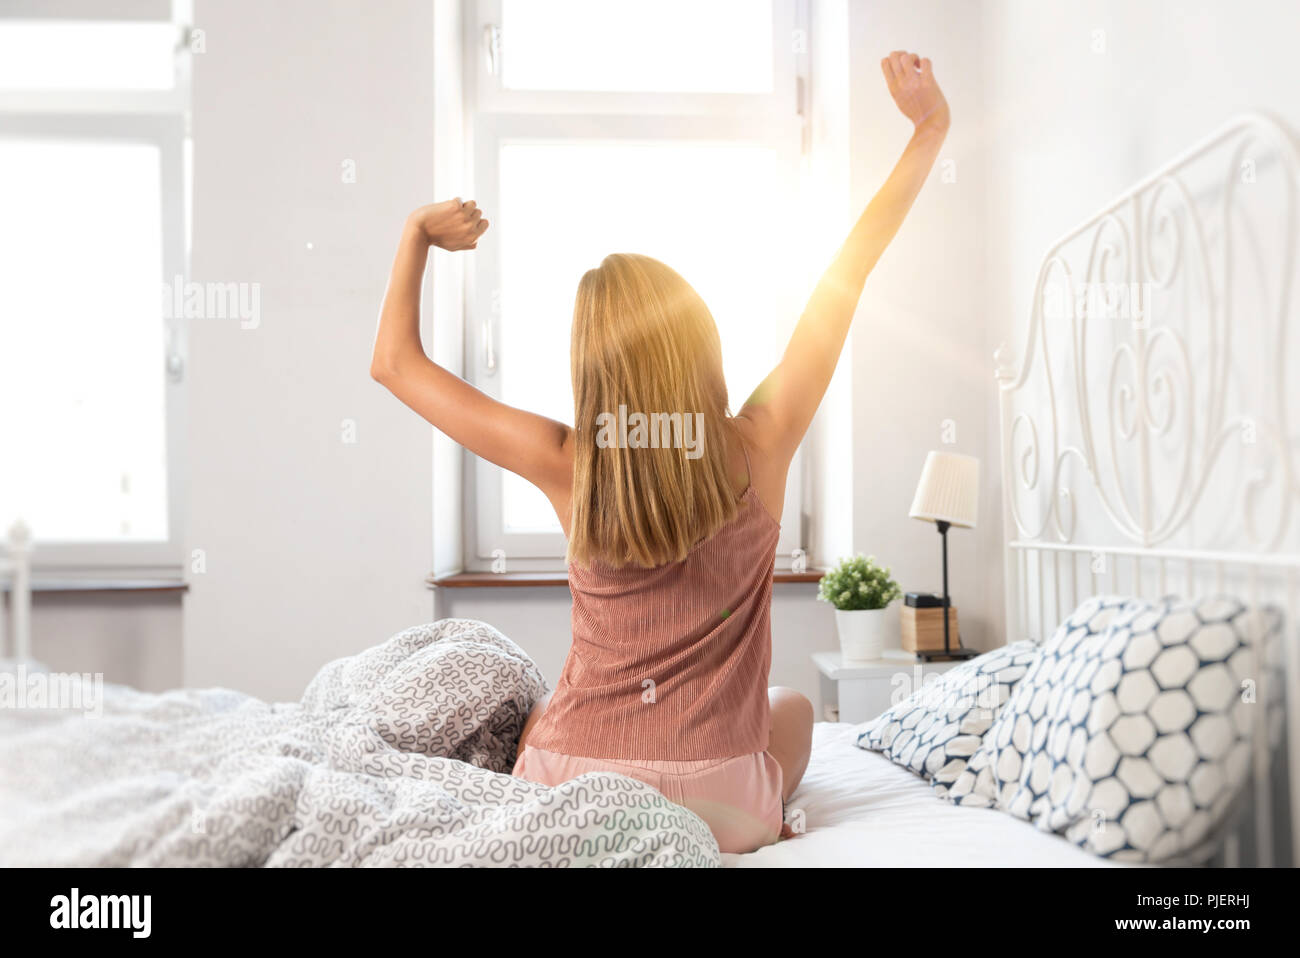 Back view of woman stretching in bed. Wake up at sunrise Stock Photo